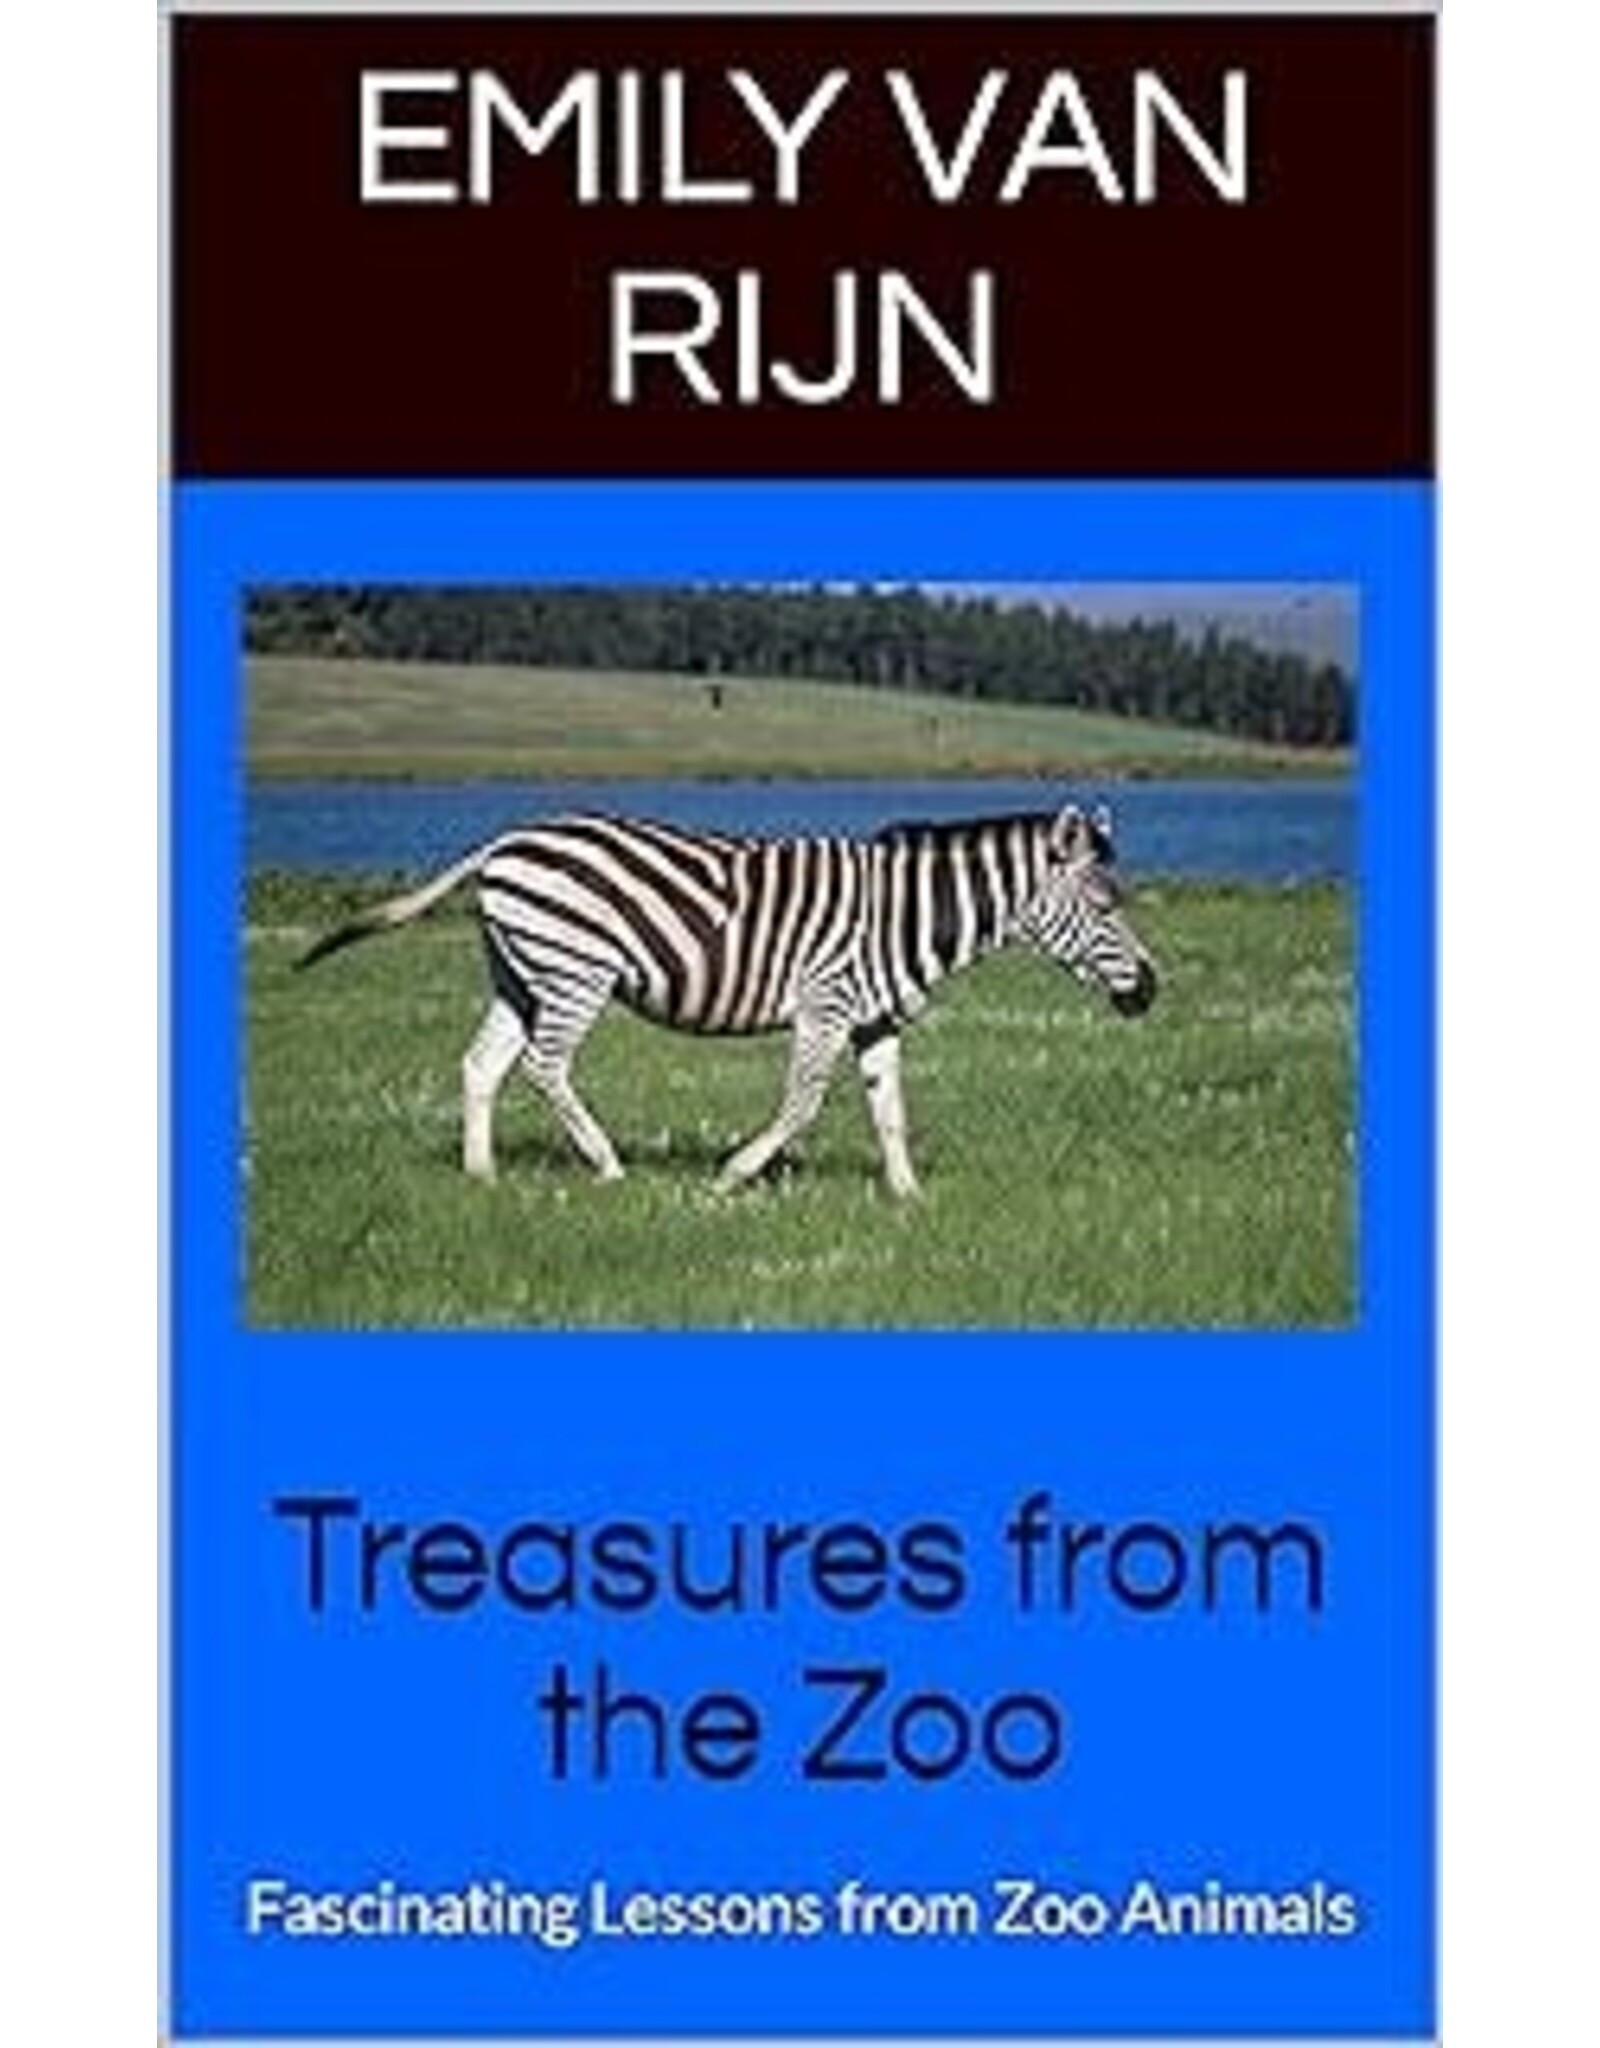 Emily van Rijn Treasures from the Zoo - Fascinating Lessons from Zoo Animals